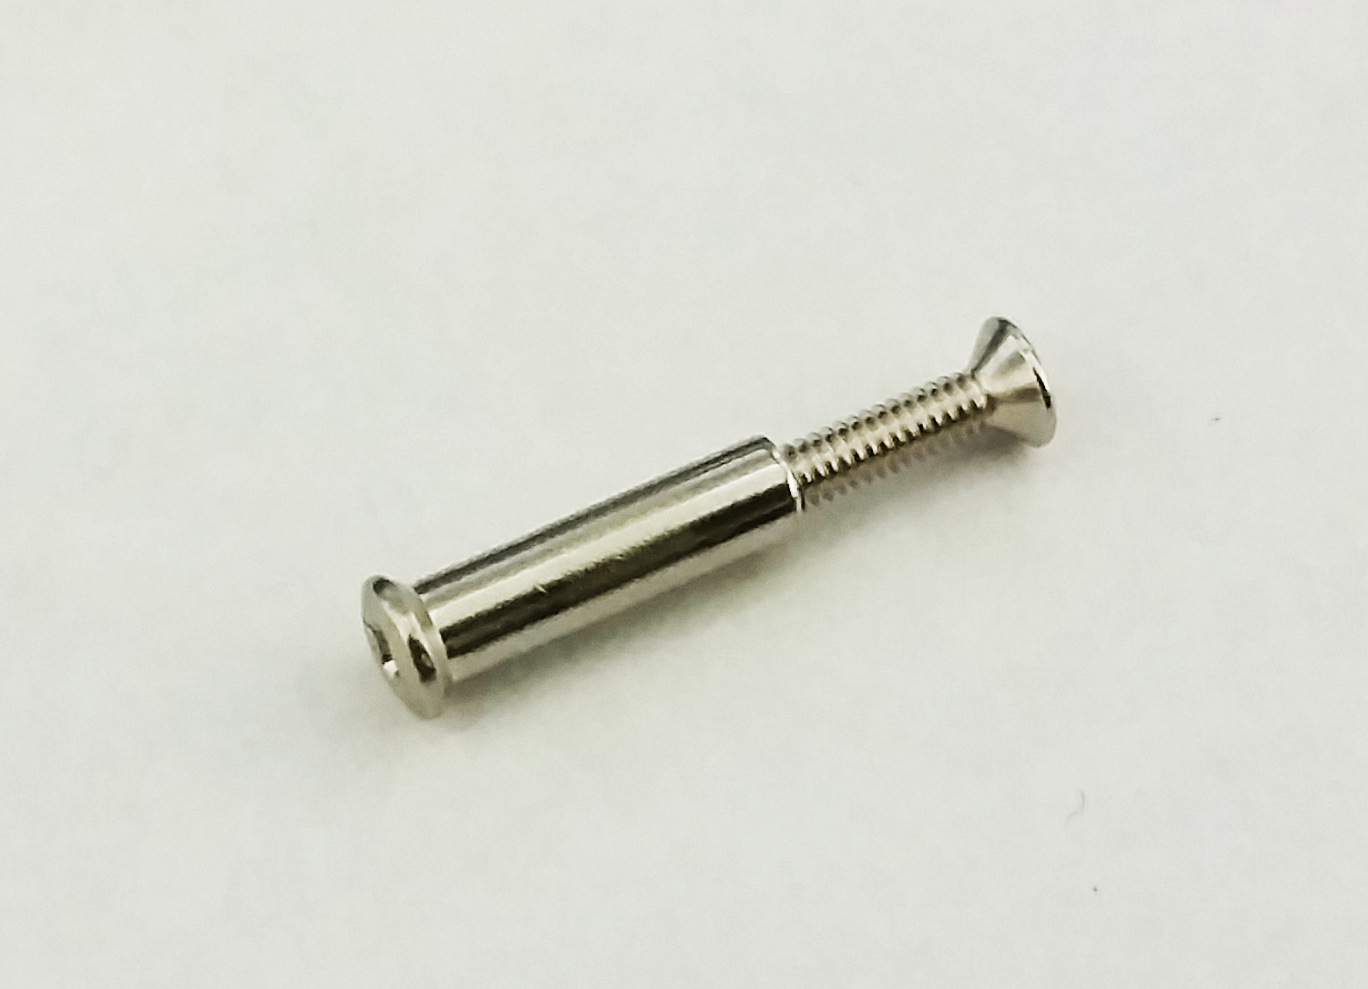 G-48 cover plate nut and screw set